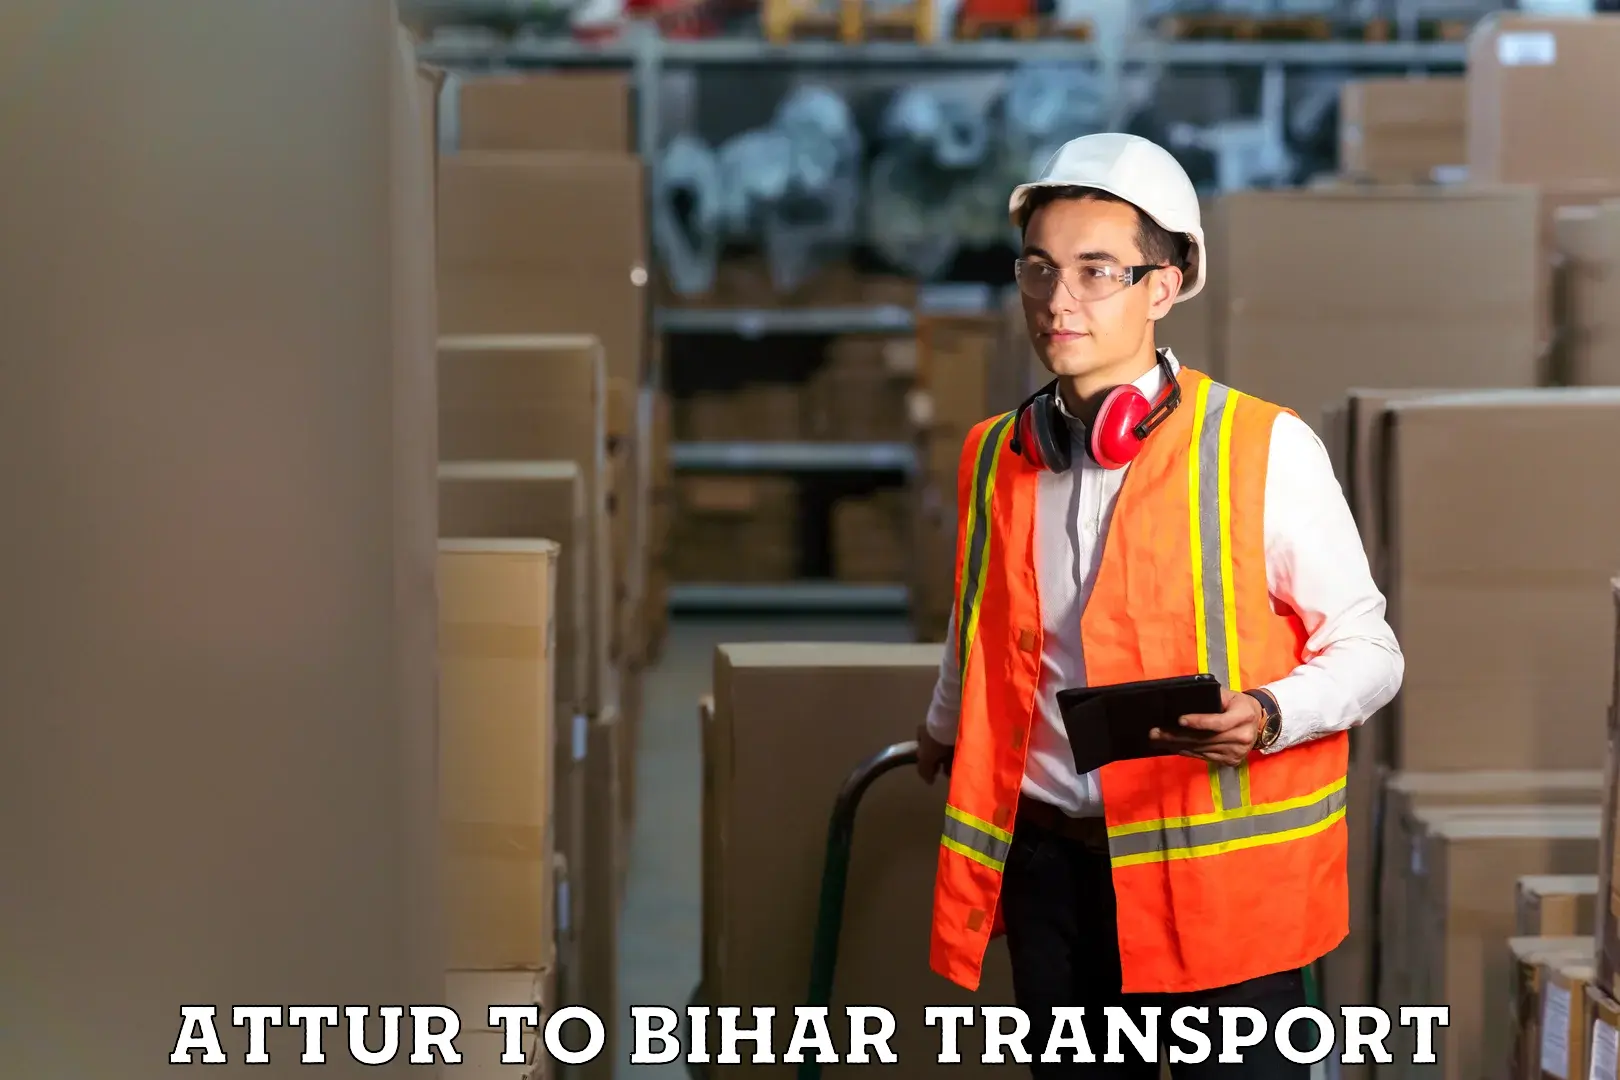 Transport bike from one state to another Attur to Bihar